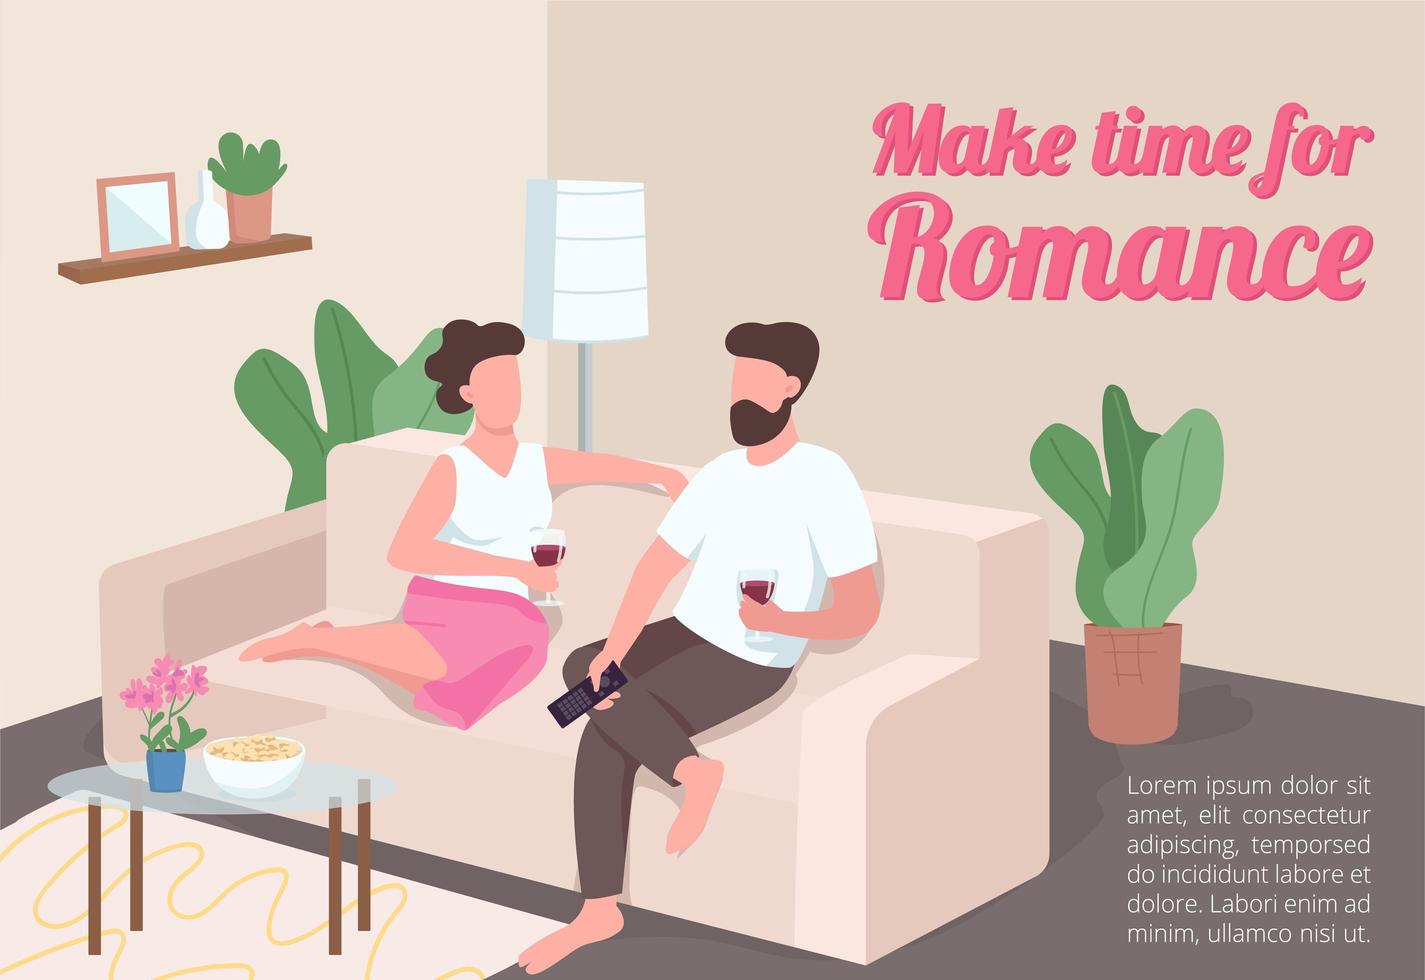 Make time for romance poster vector